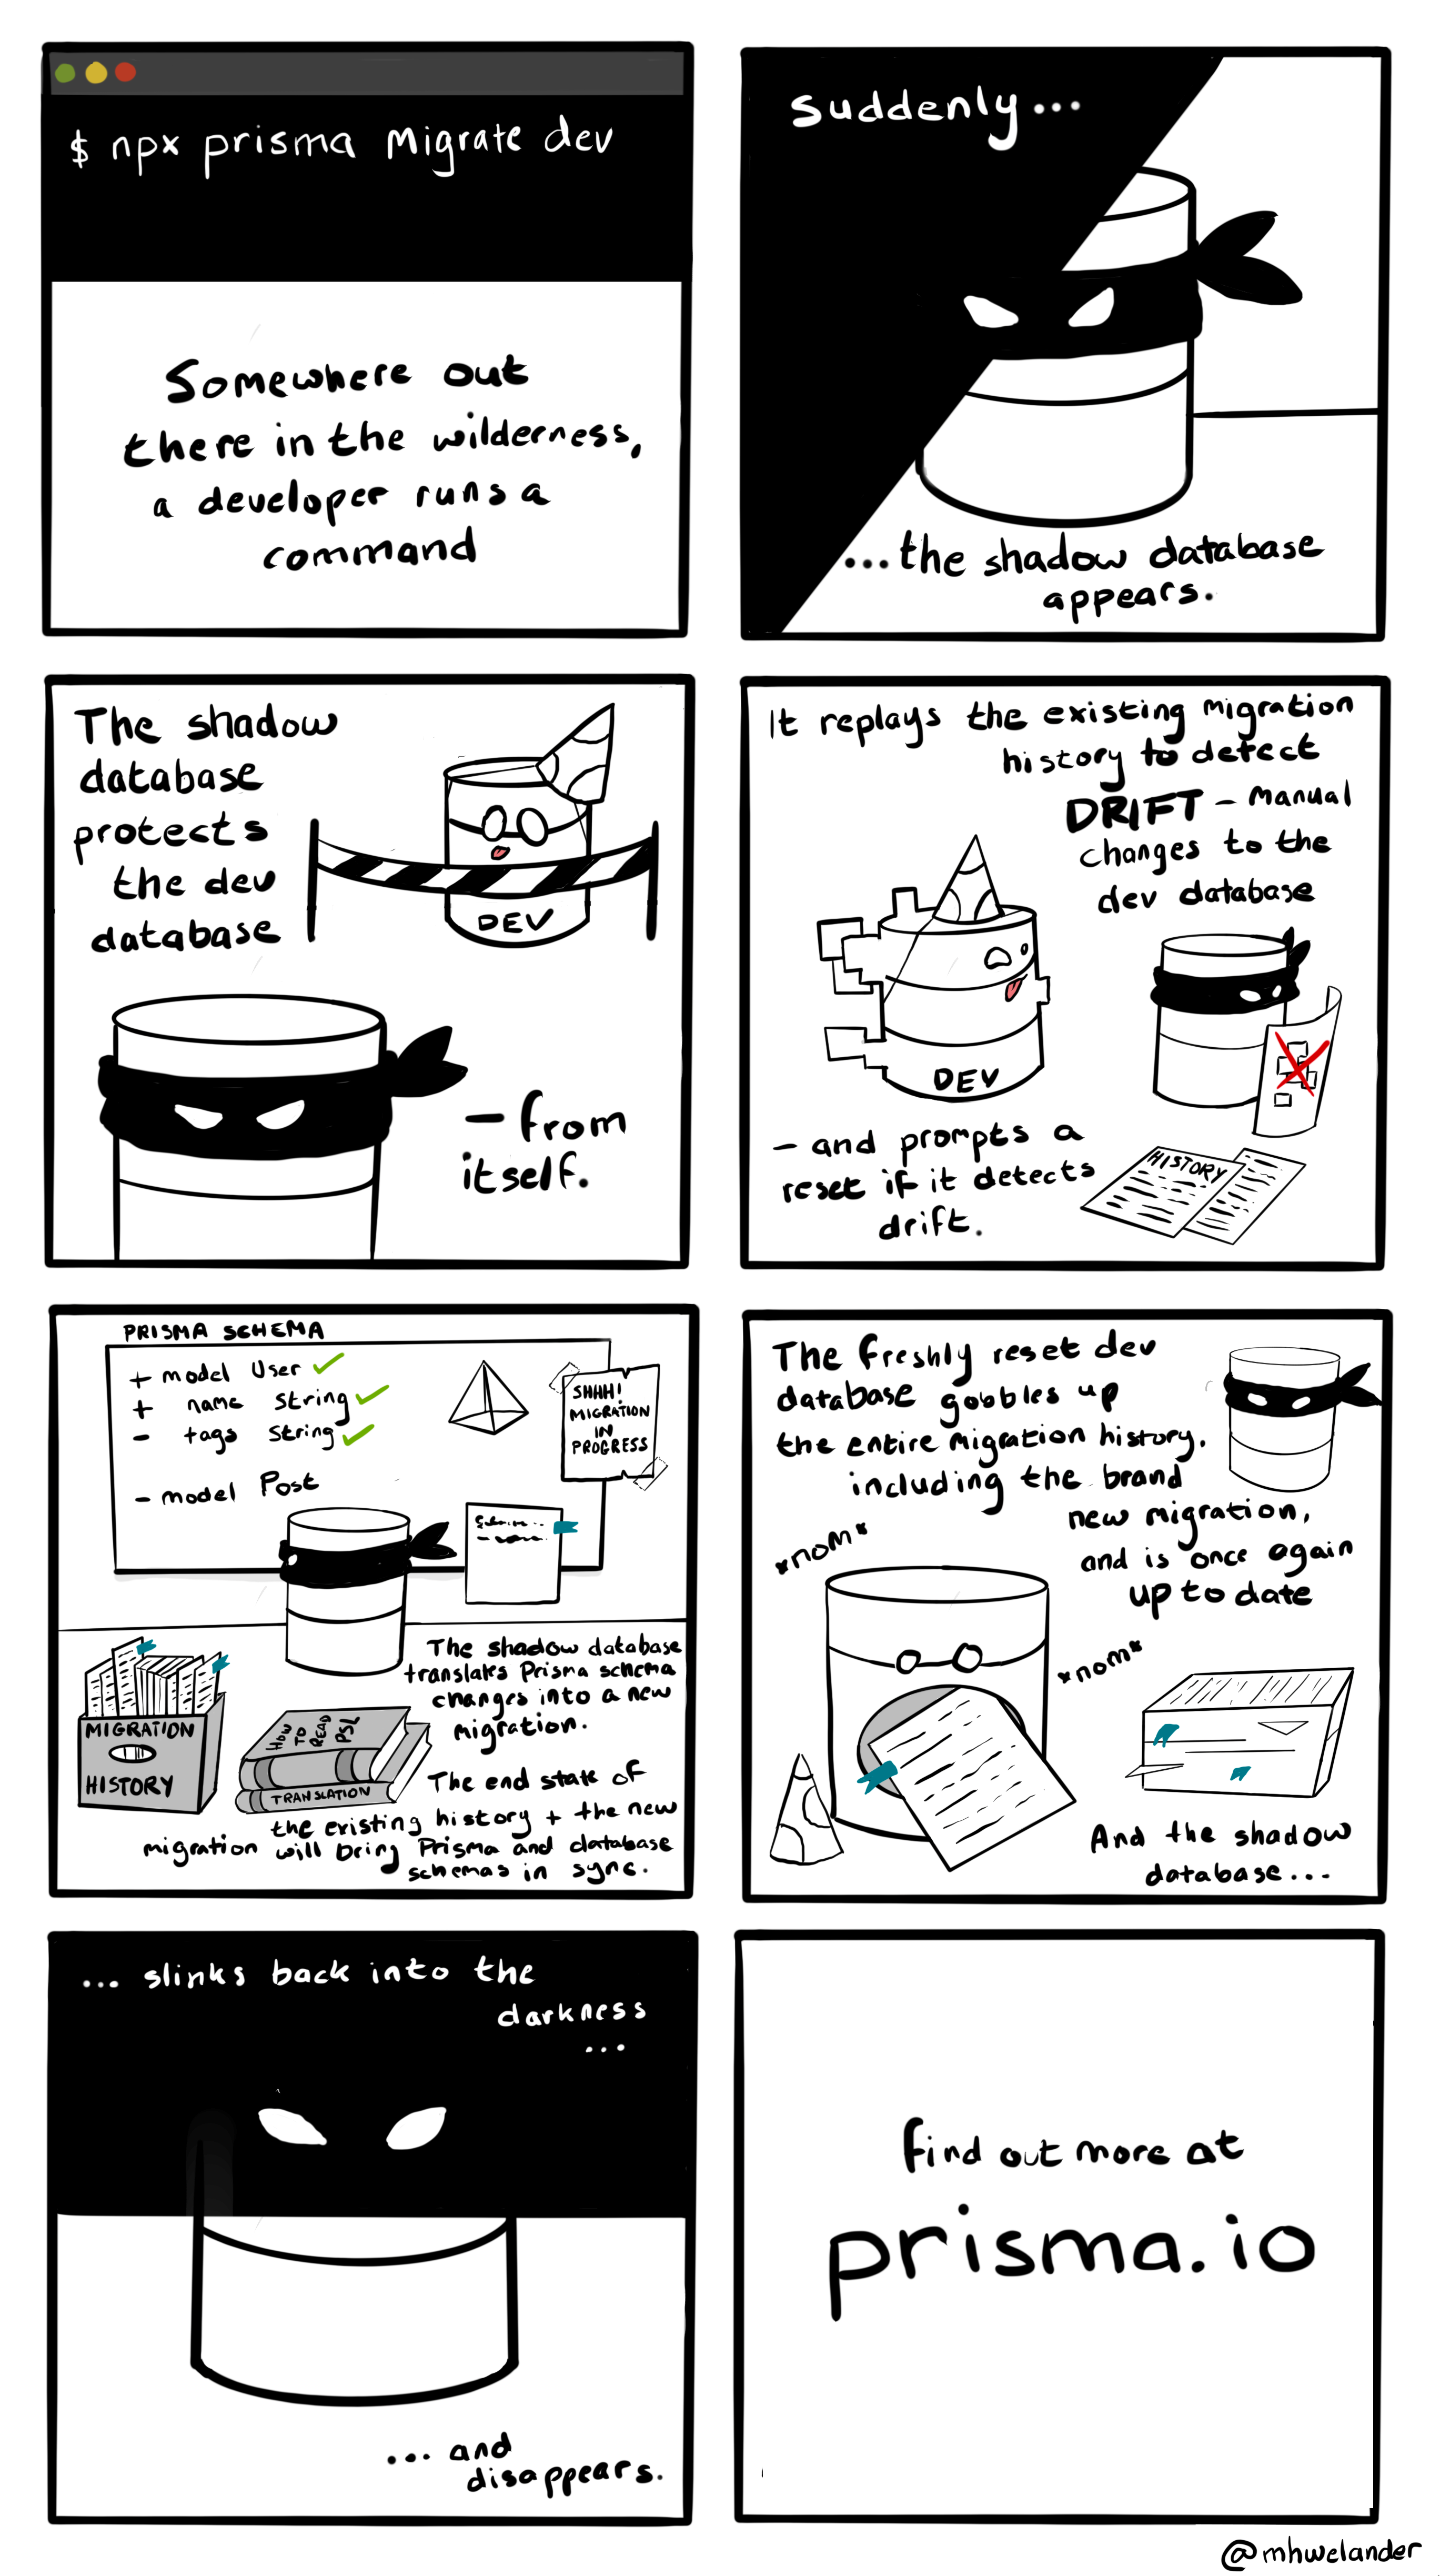 A cartoon that shows how the shadow database works.